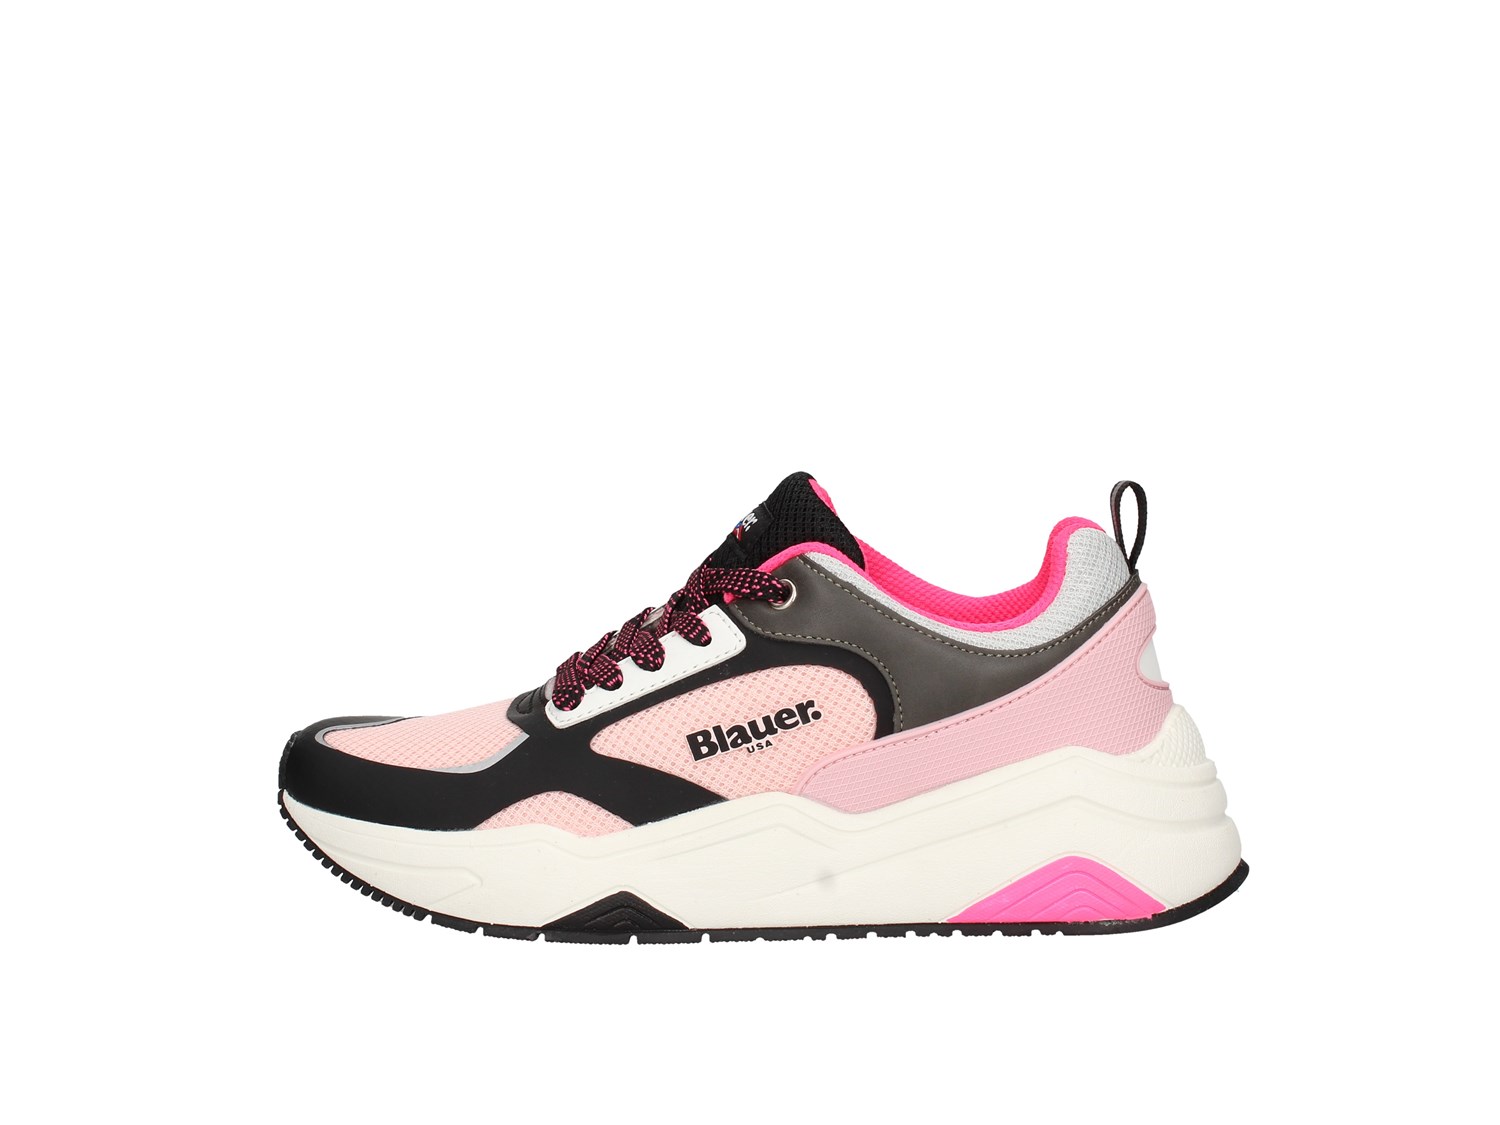 Blauer. U.s.a. S1taylor01/mes Pink Gray And Black Shoes Women Sneakers